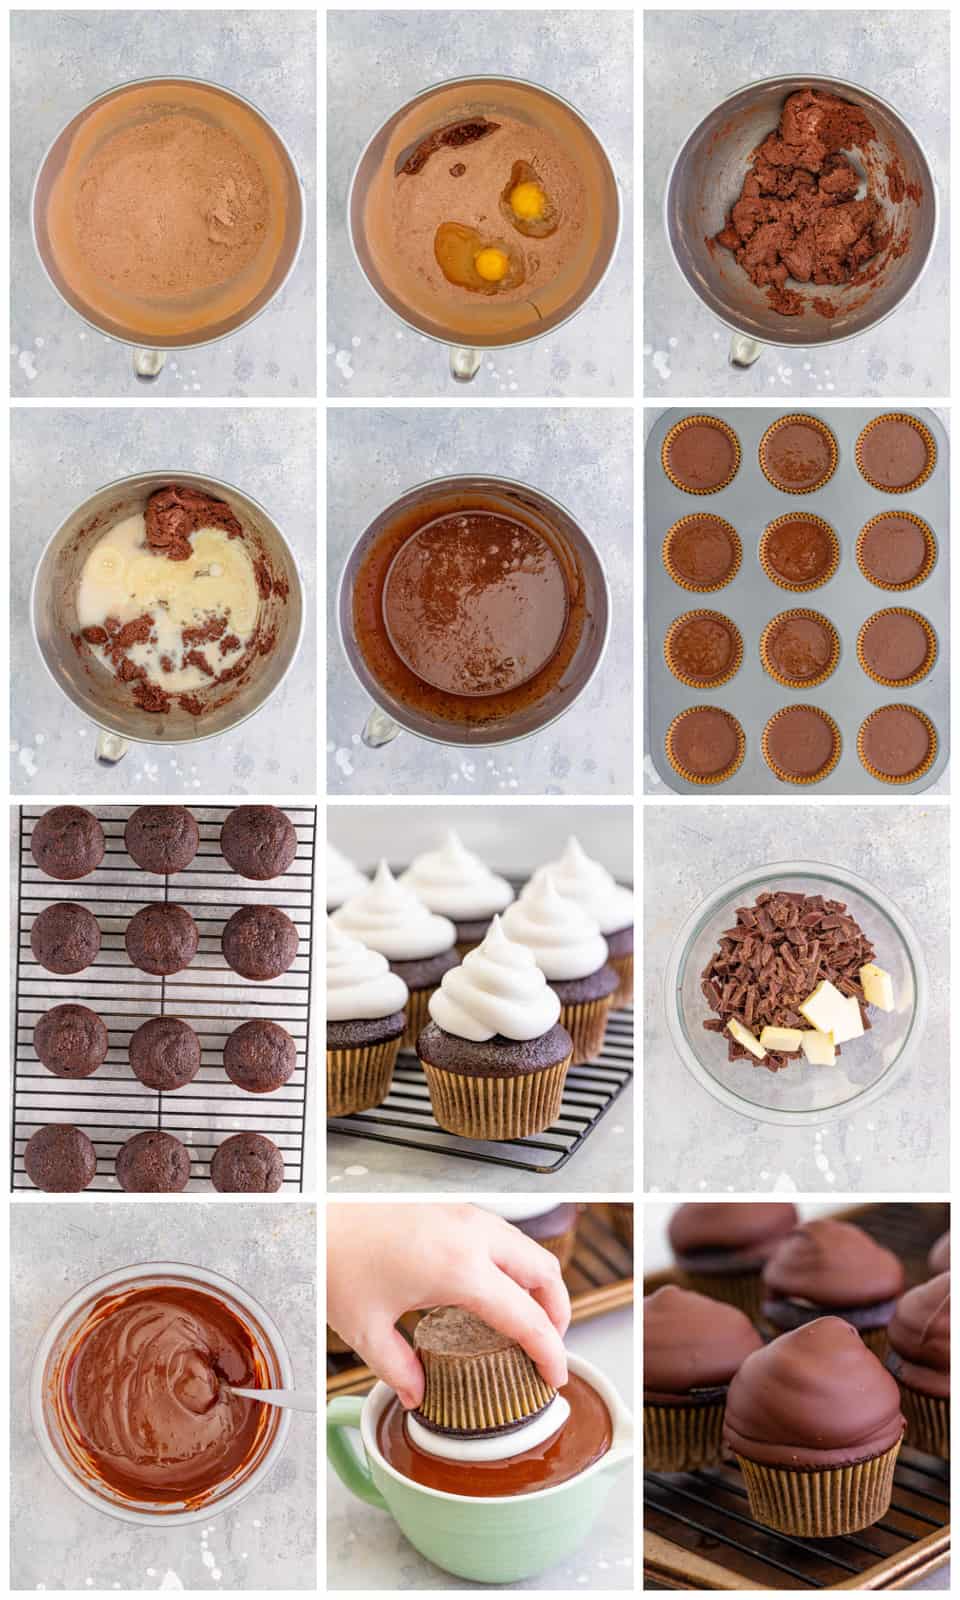 Step by step photos on how to make Hi-Hat Cupcakes.